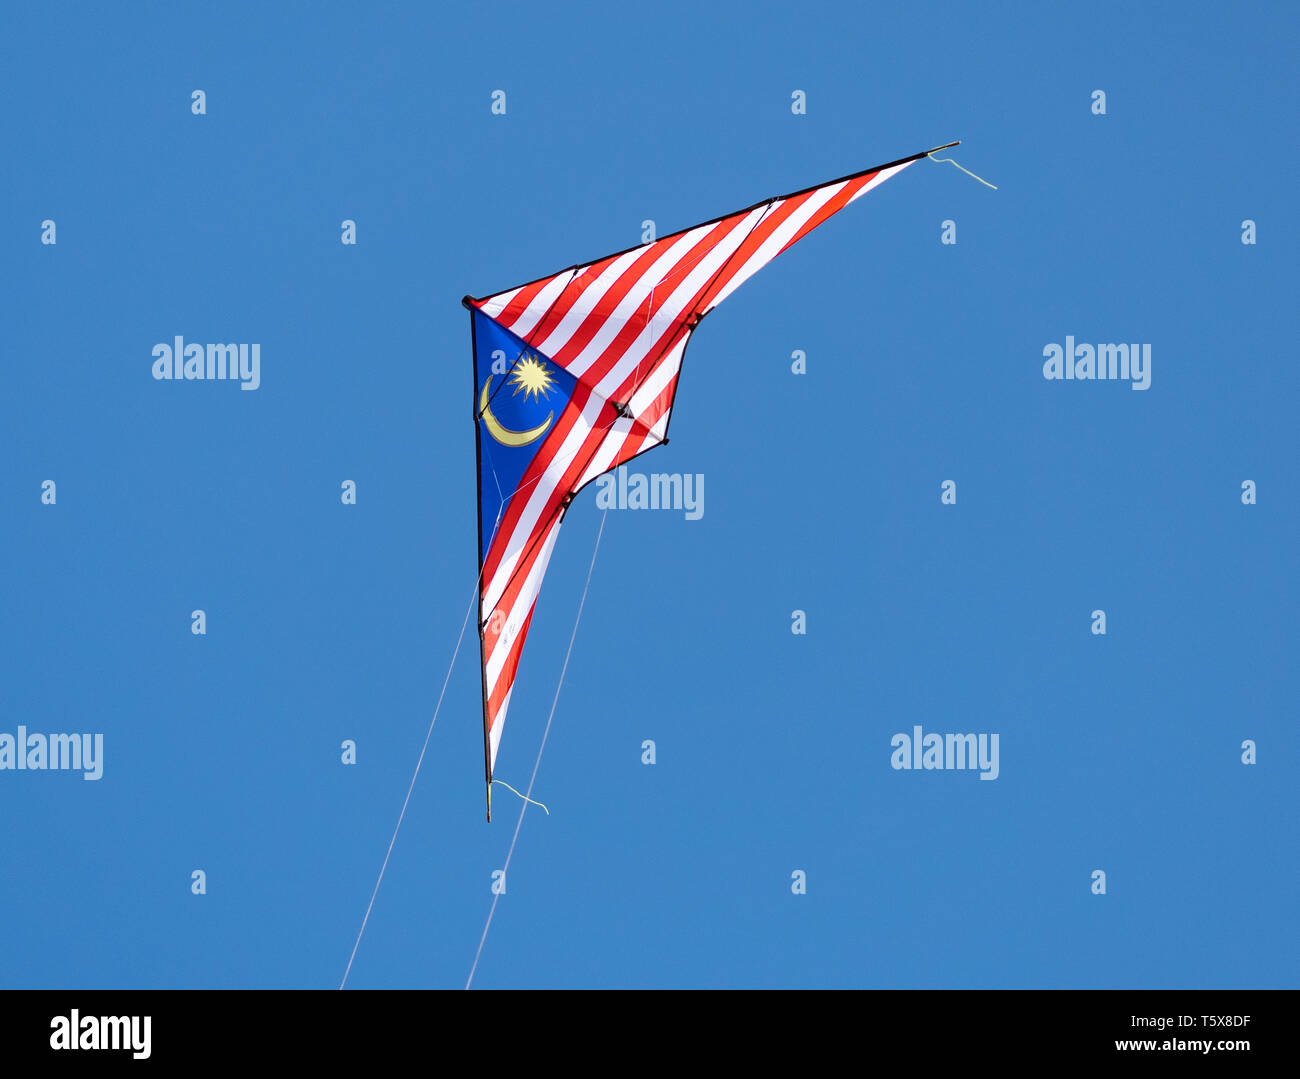 2-line stunt kite with the colours of the Malaysian flag flying on a blue sky background. Stock Photo